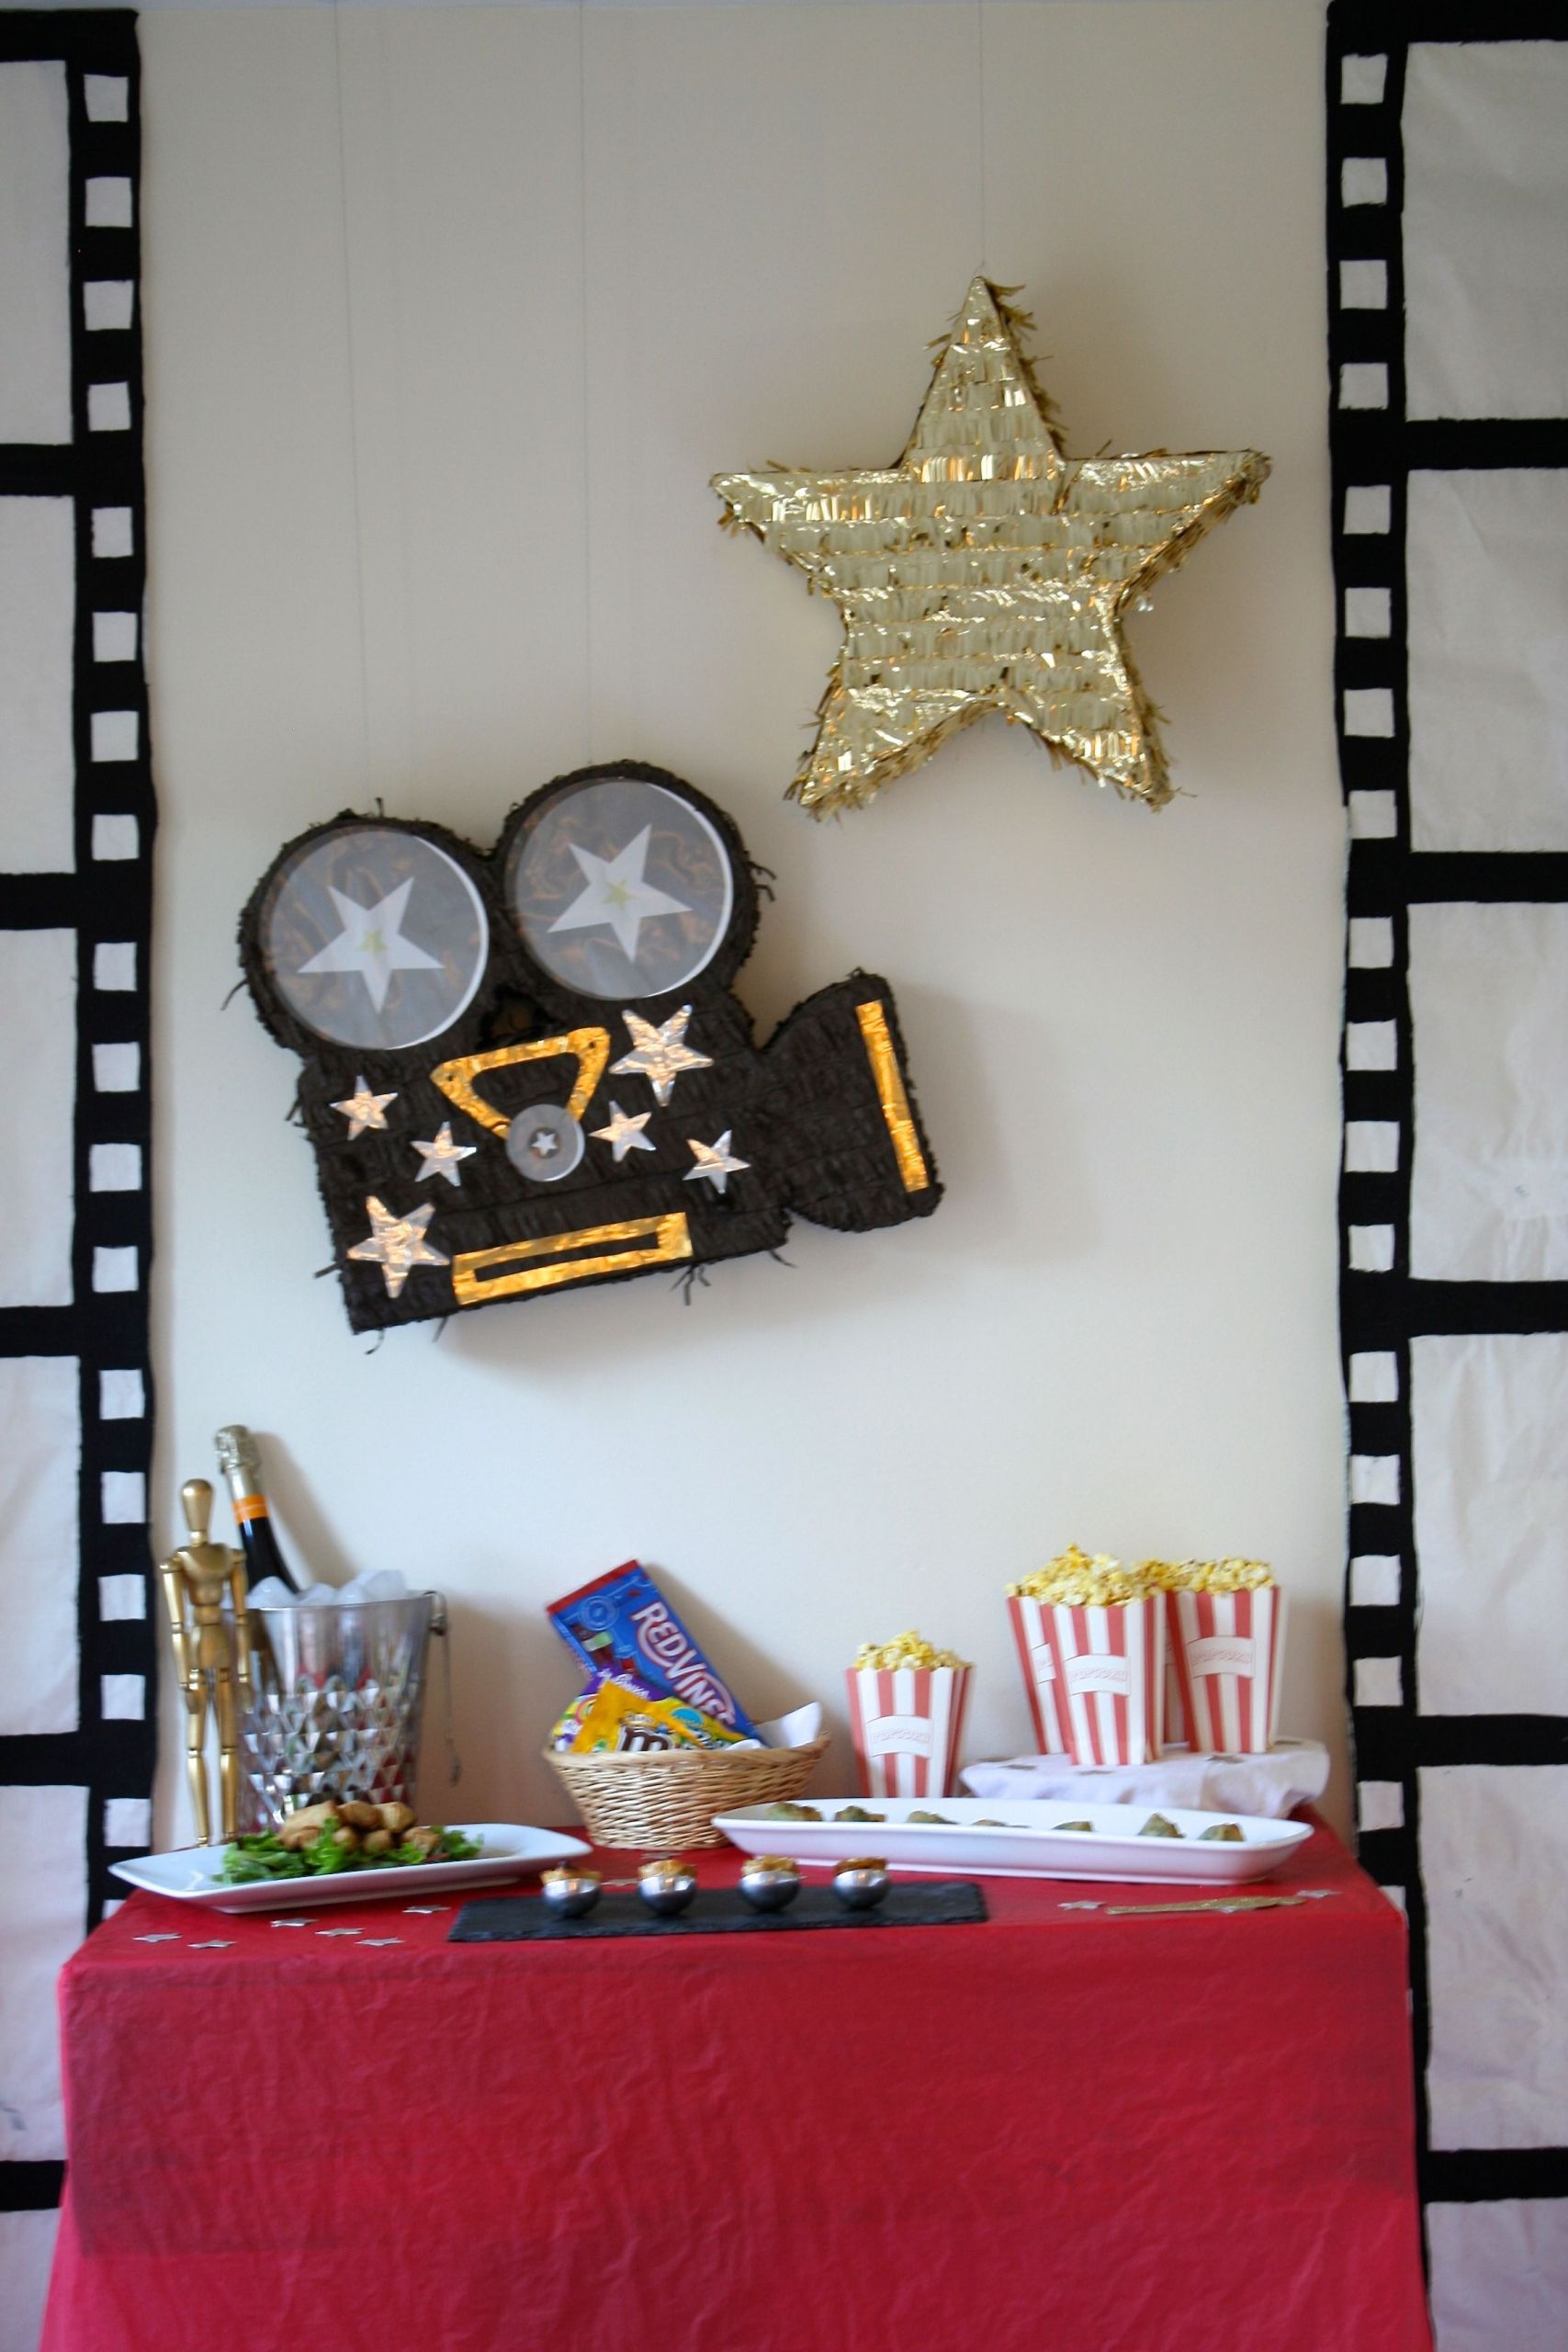 DIY Hollywood Party Decorations
 Oscar party buffet with film strips and movie themed